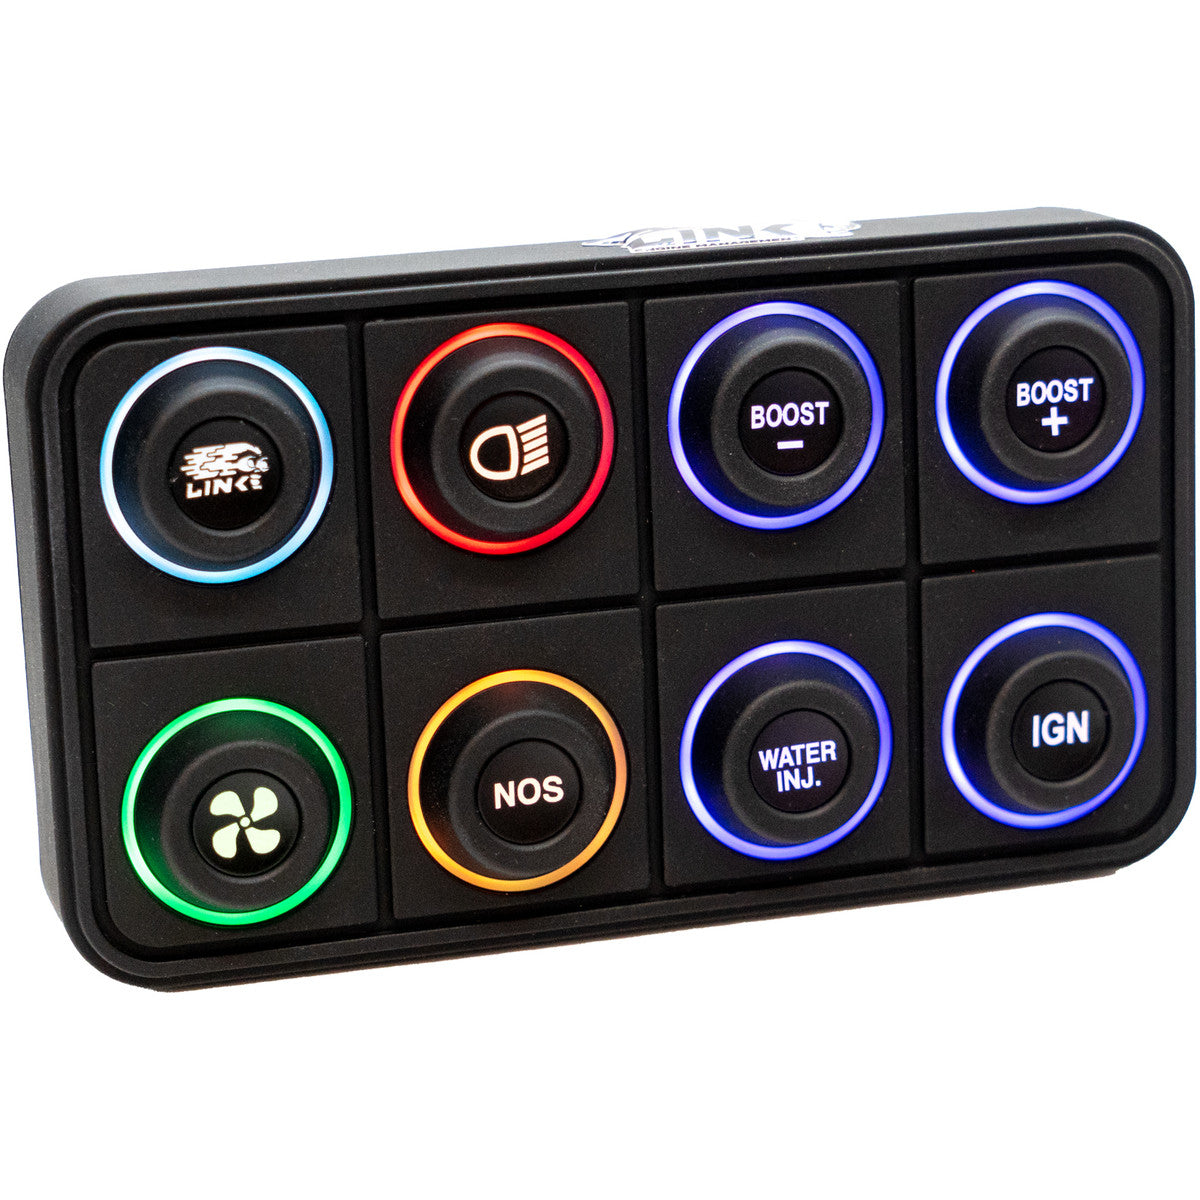 8 key (2x4) CAN Keypad with interchangeable 15mm inserts (sold separately)